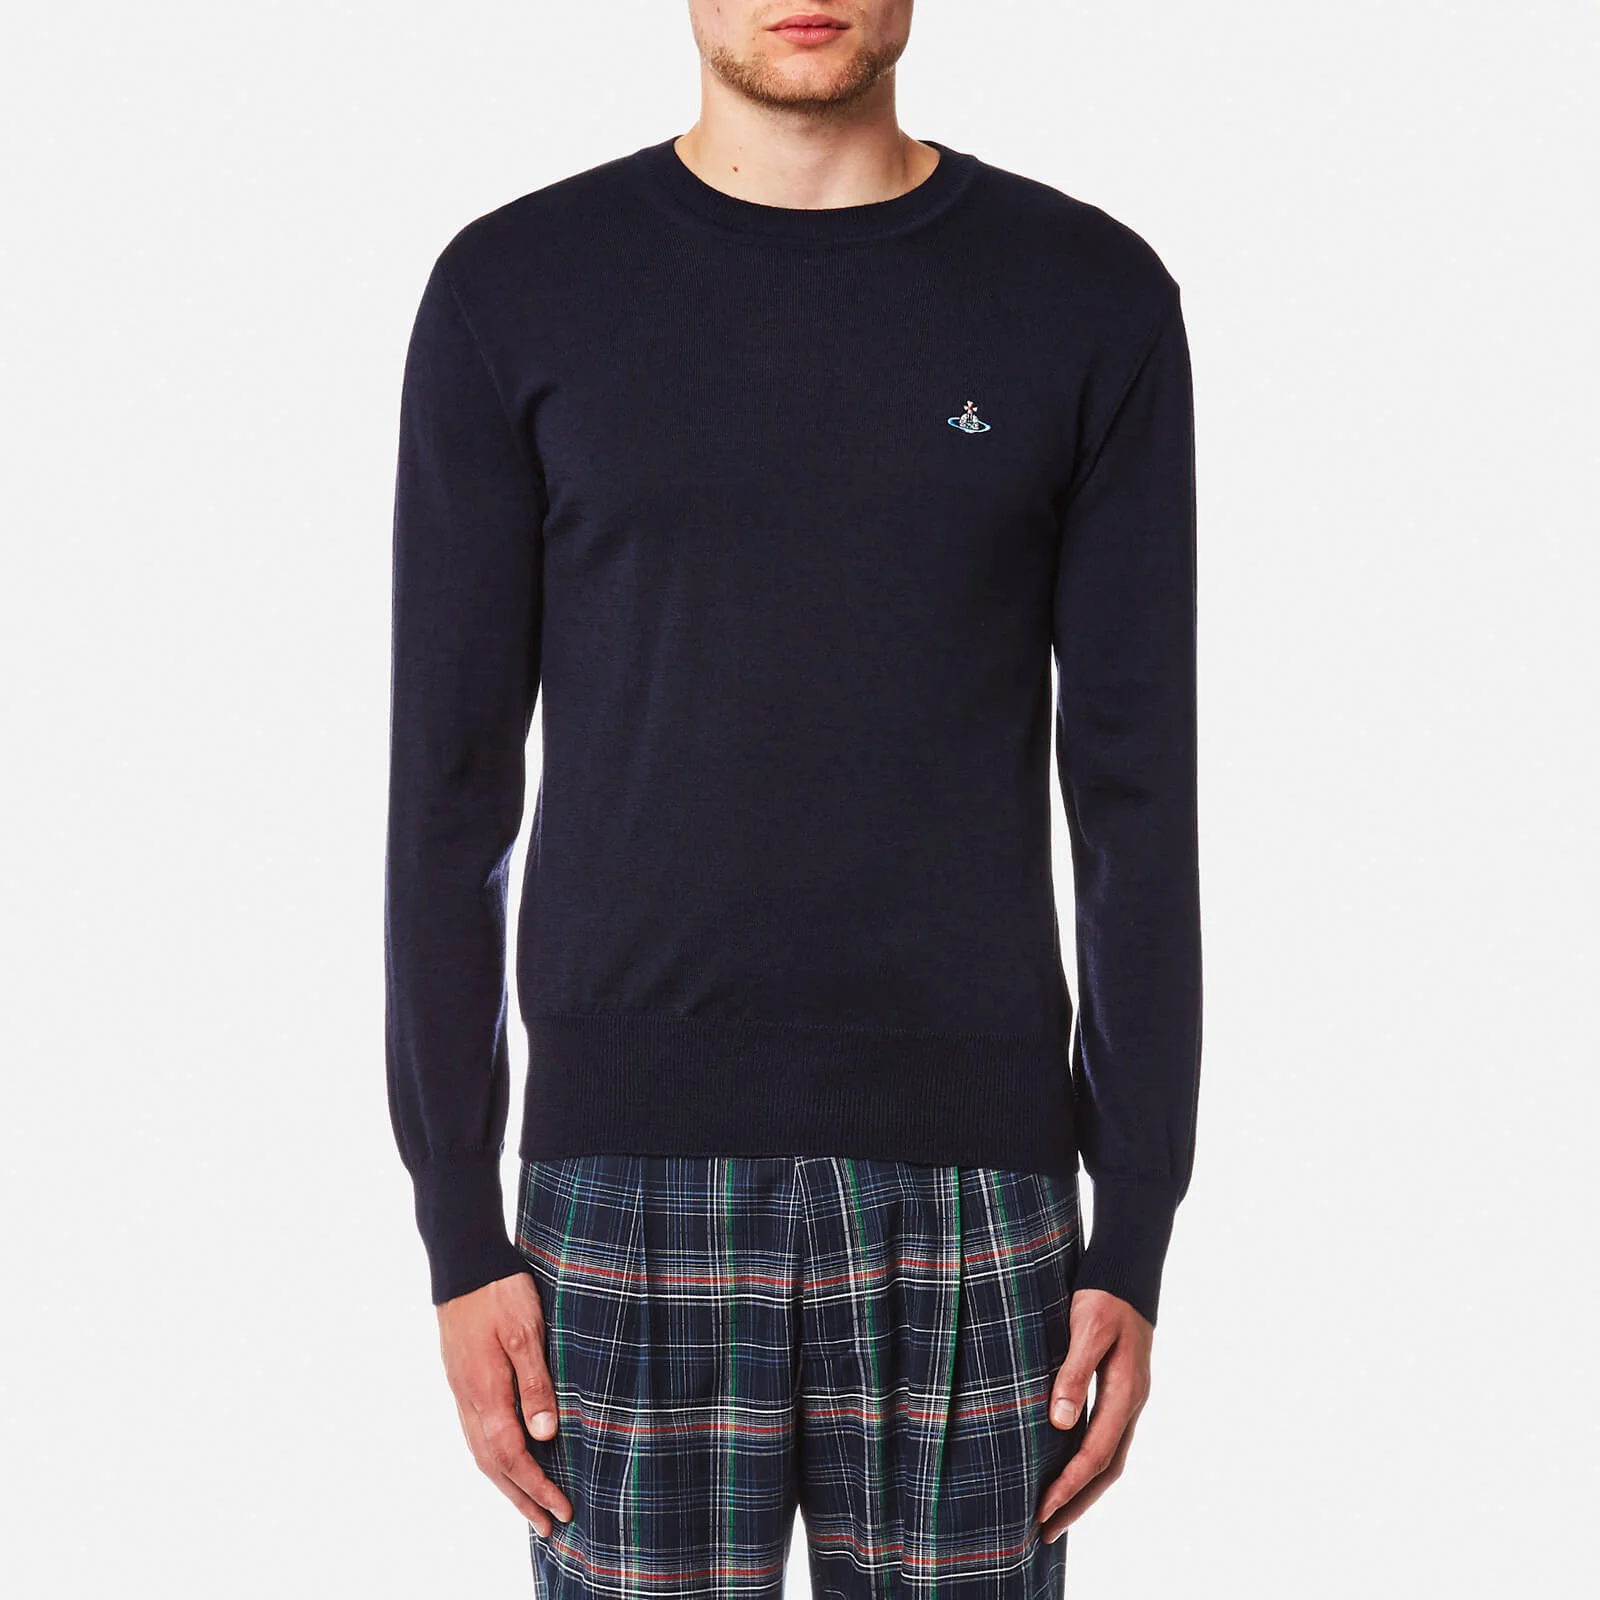 Vivienne Westwood Men's Classic Crew Neck Knitted Jumper - Navy Image 1